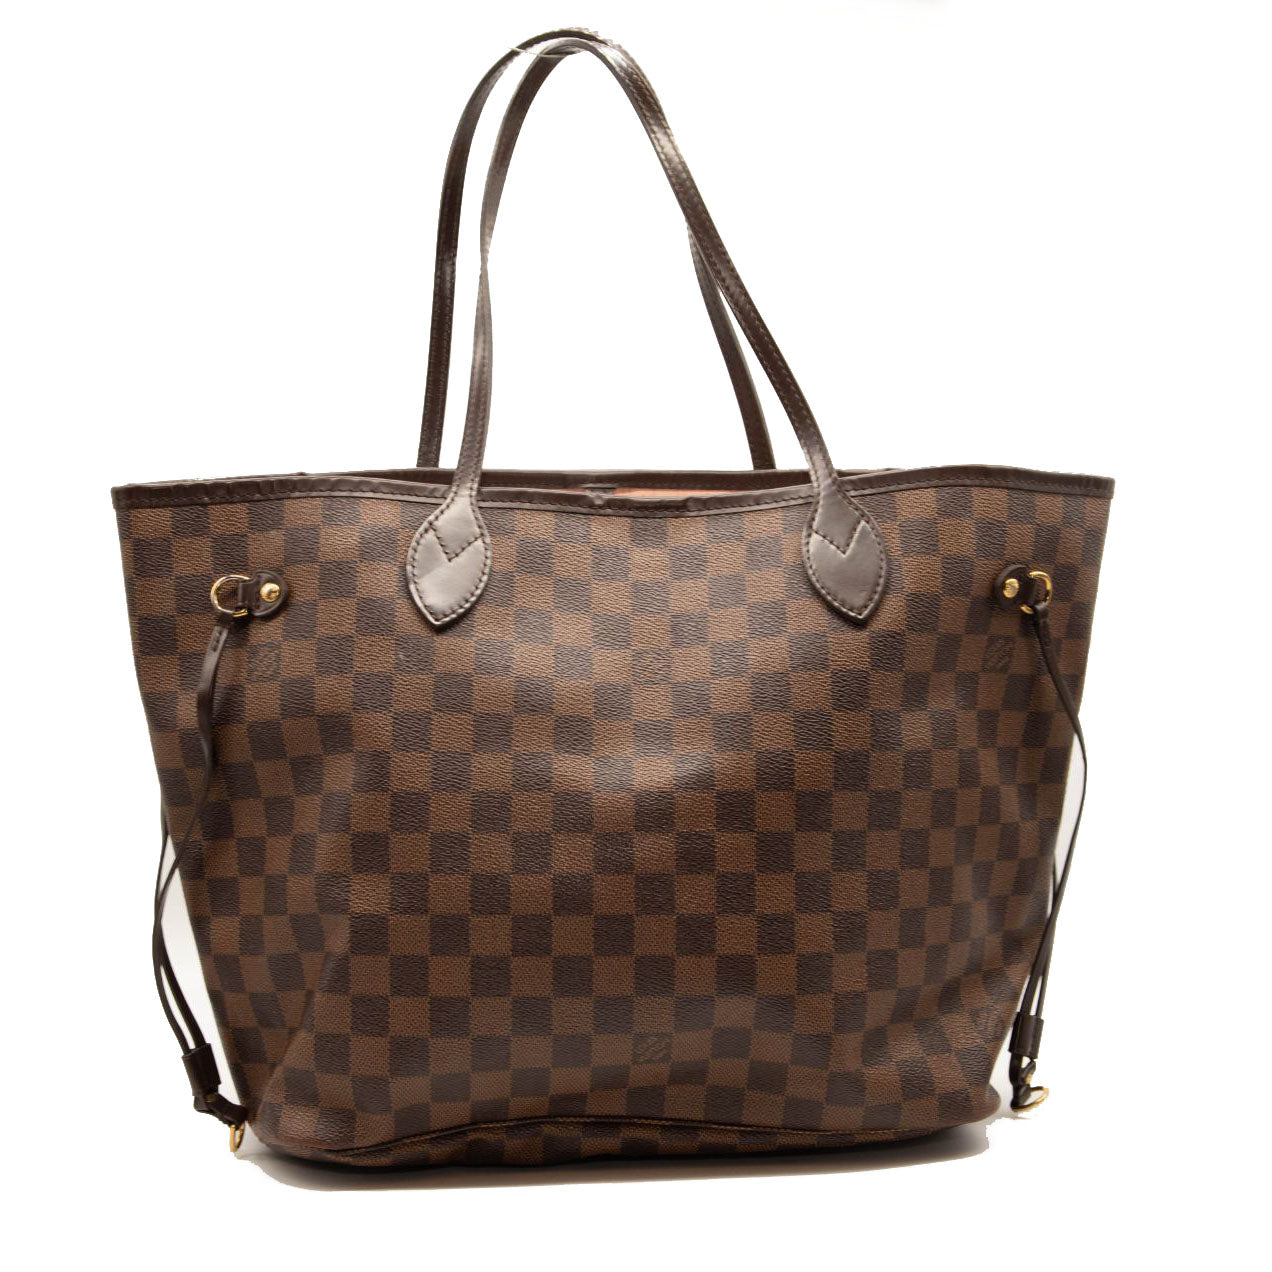 Louis Vuitton Neverfull Bag Mm Damier Ebene Brown Canvas Tote - MyDesignerly